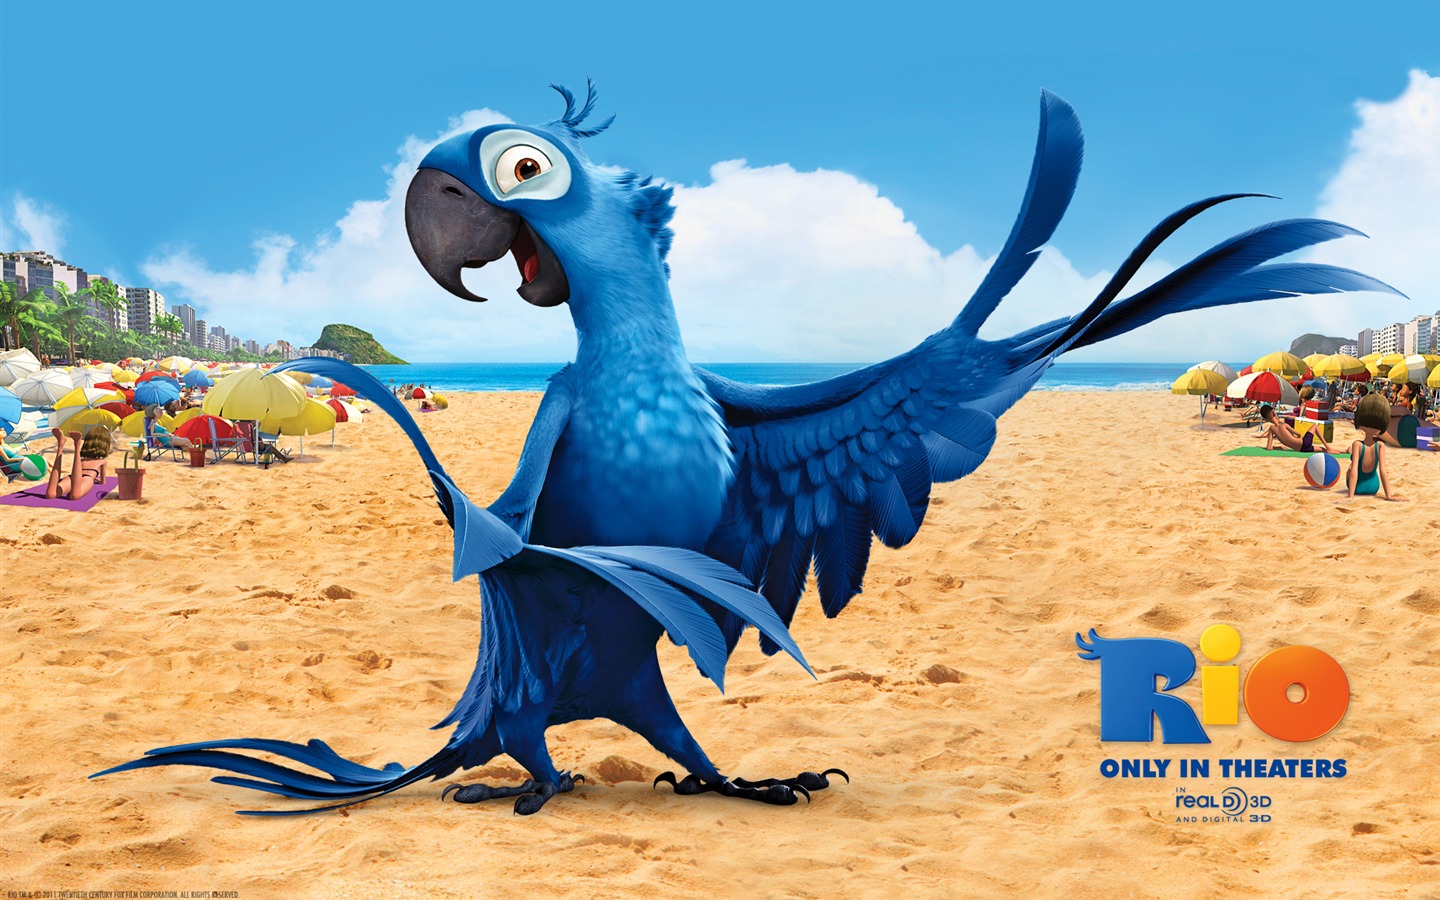 Rio 2011 wallpapers #2 - 1440x900